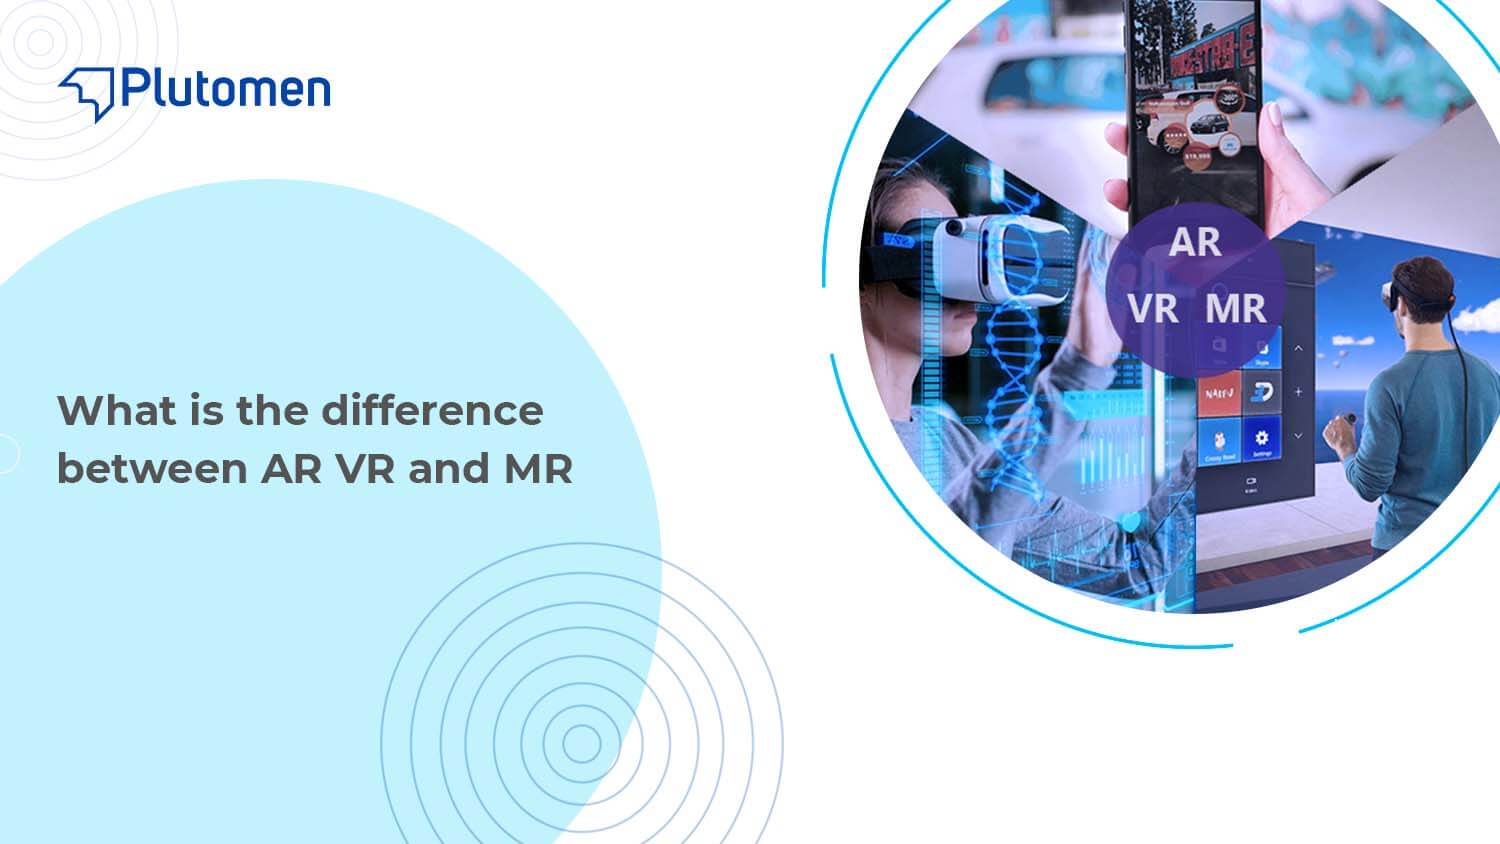 What is the difference between AR, VR and MR?